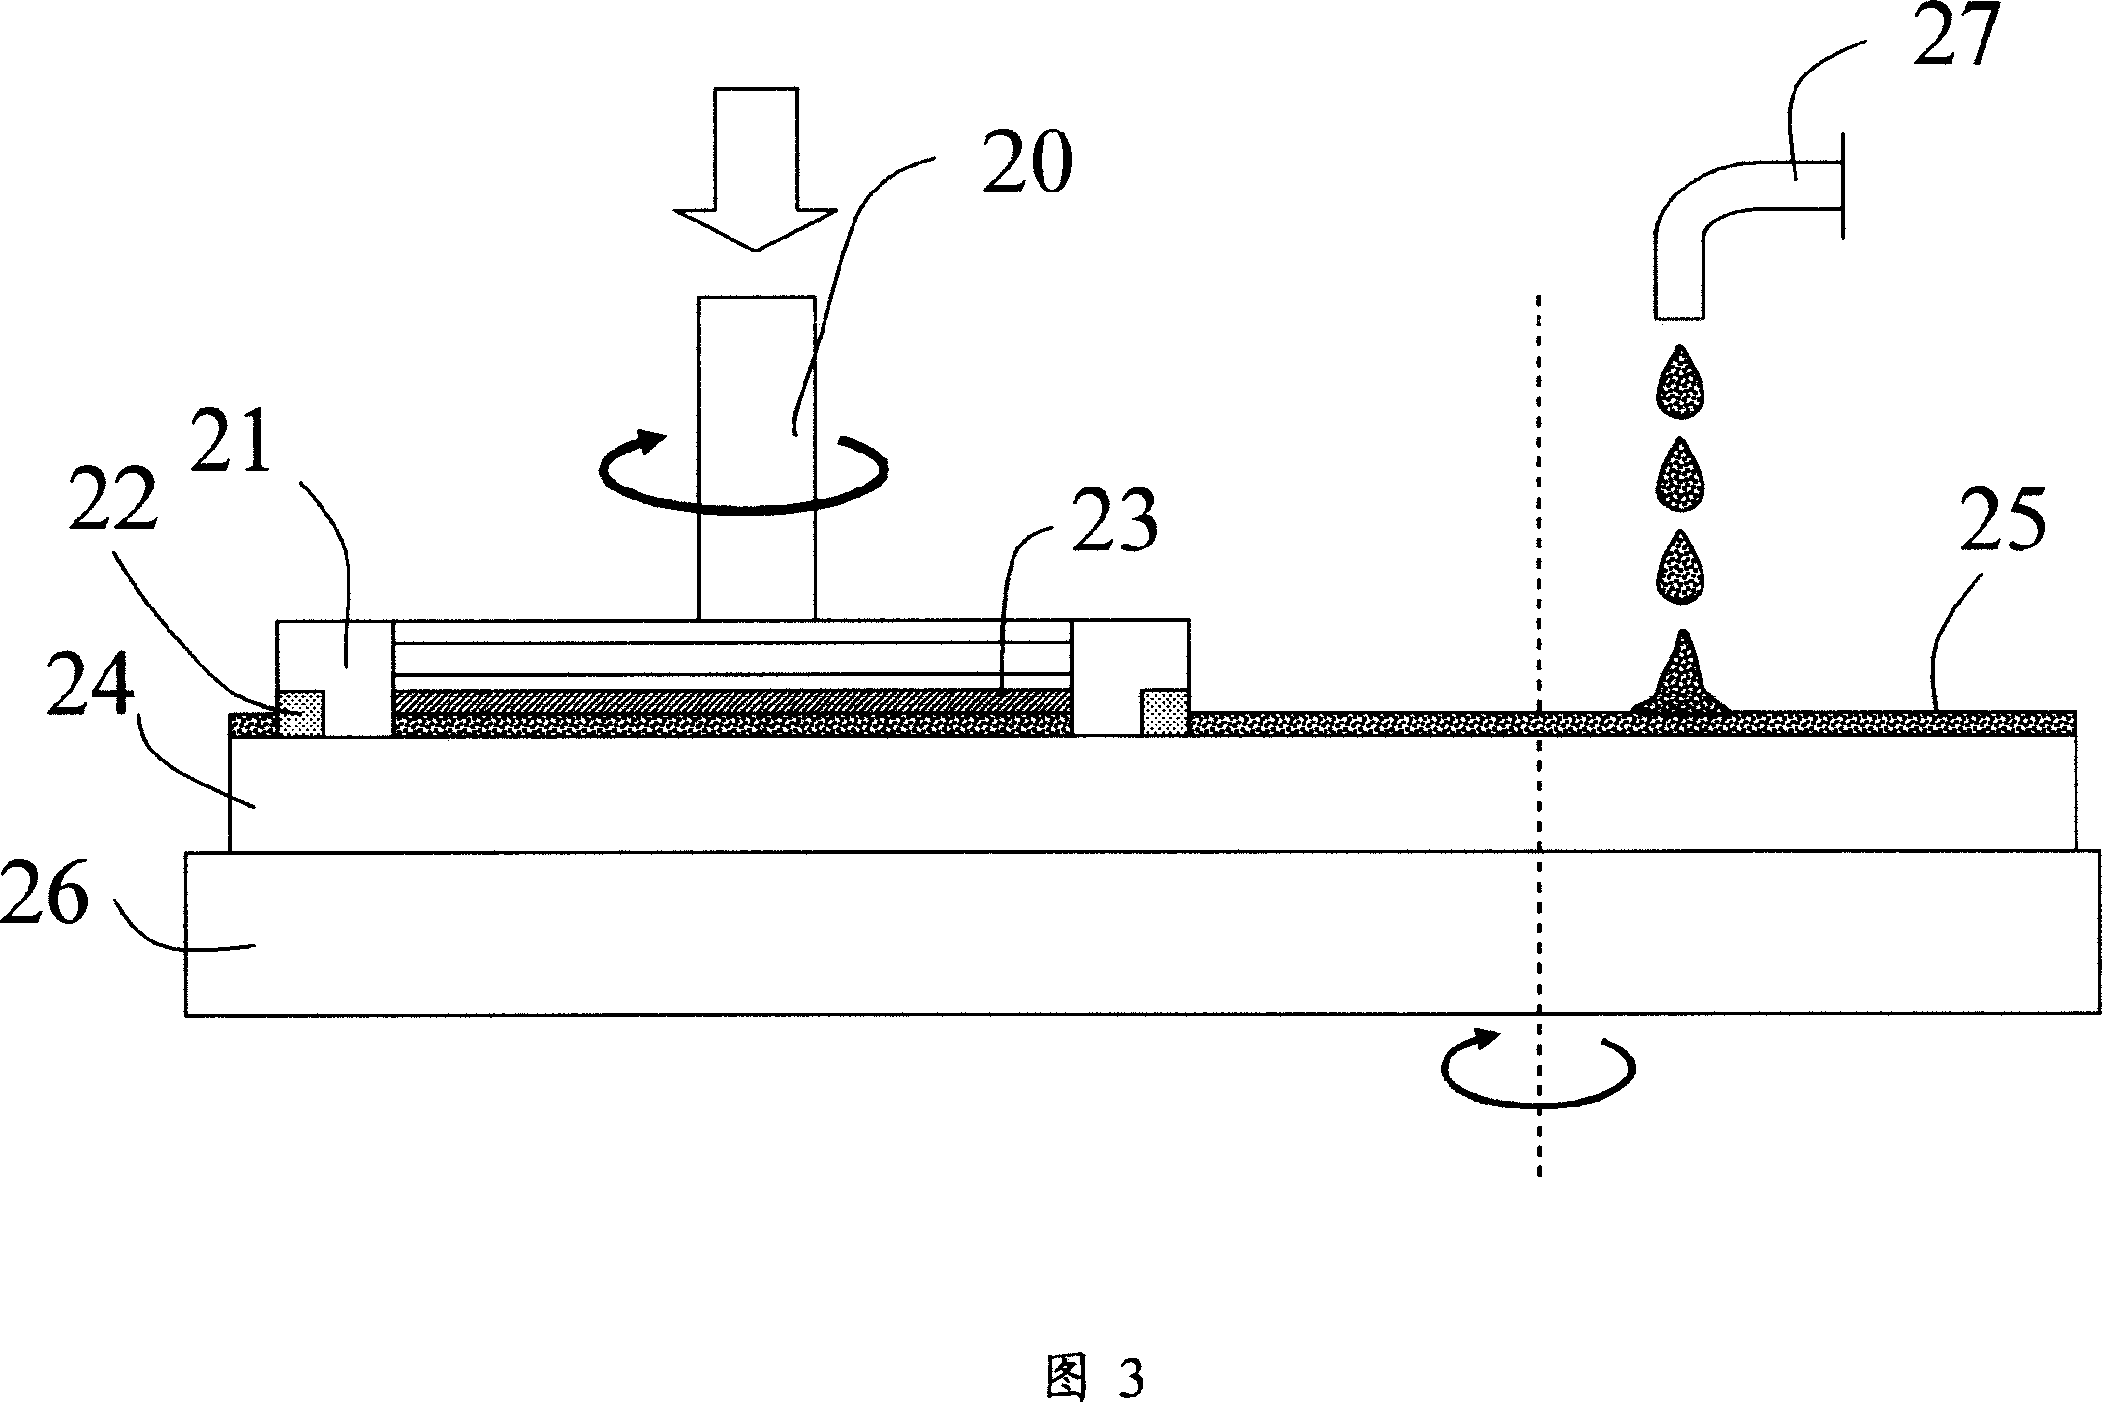 Chemical mechanism grinding and finishing device